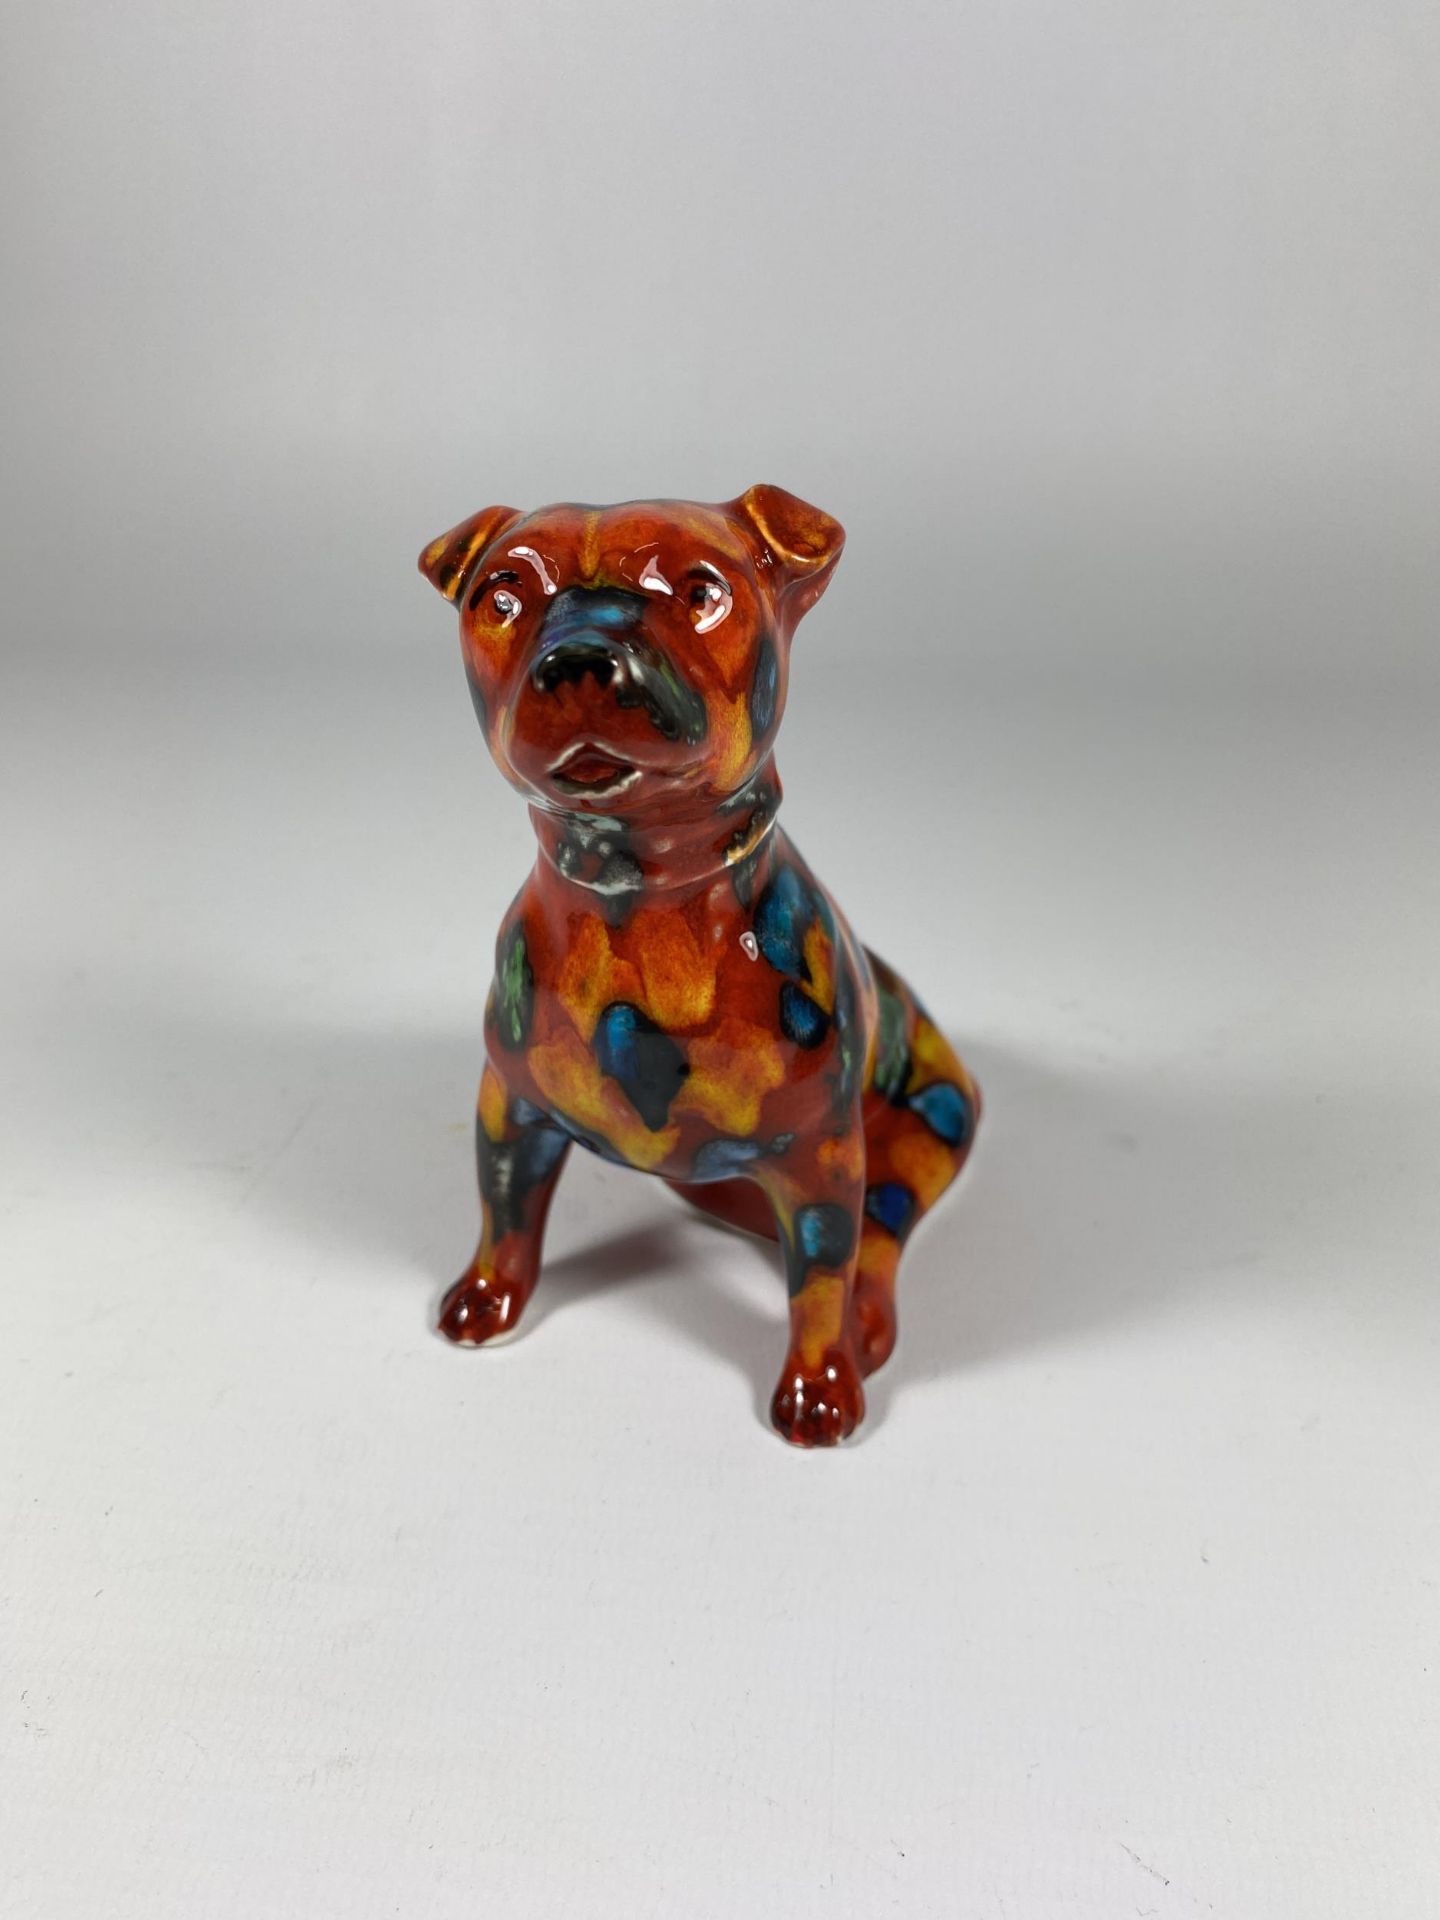 AN ANITA HARRIS HAND PAINTED AND SIGNED STAFFY DOG